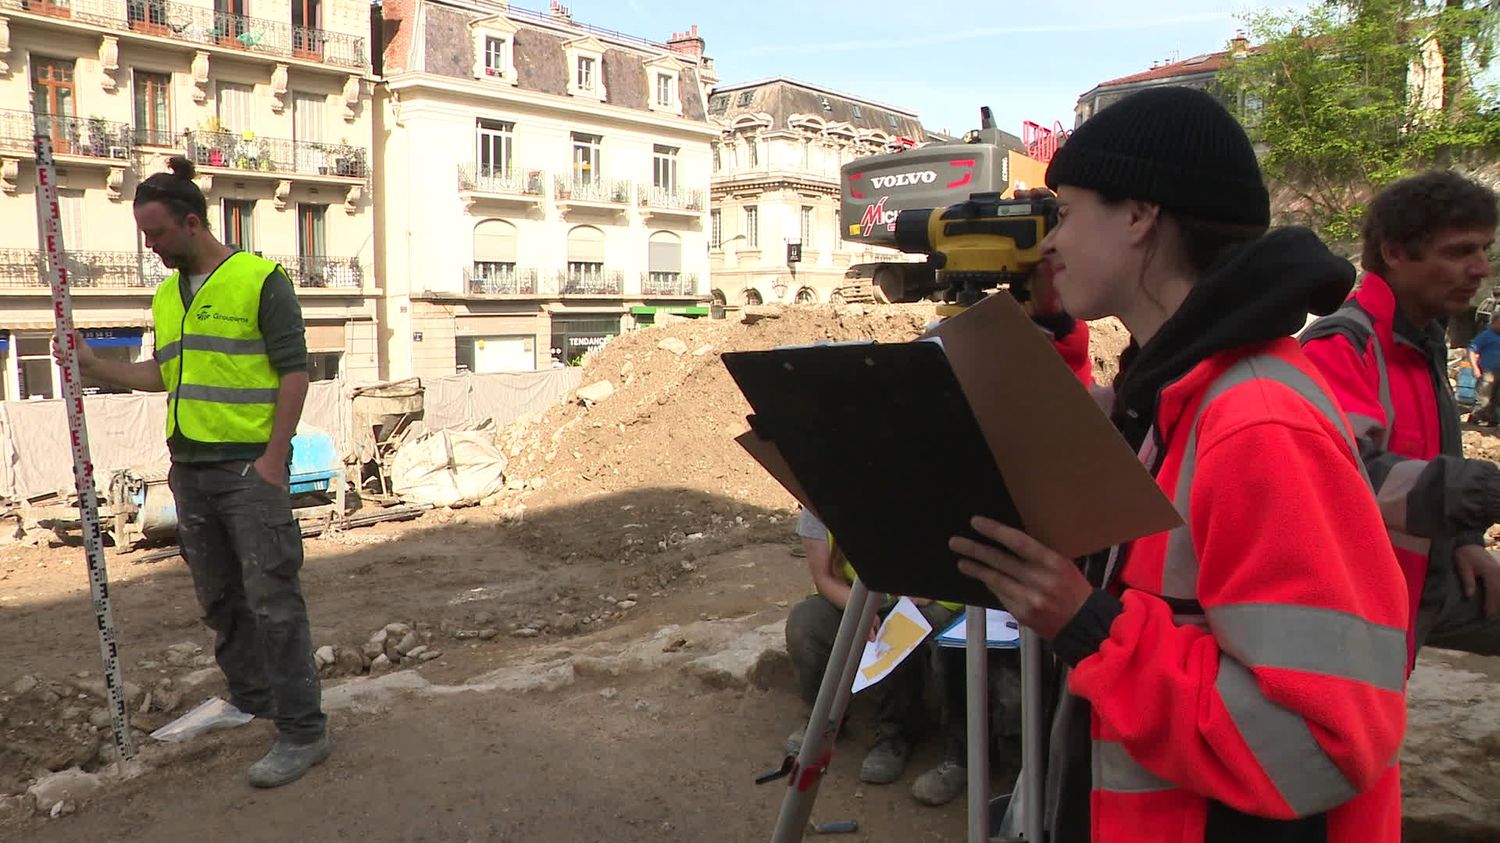 In Aix-les-Bains, a student makes an exceptional archaeological discovery in the city's old thermal baths